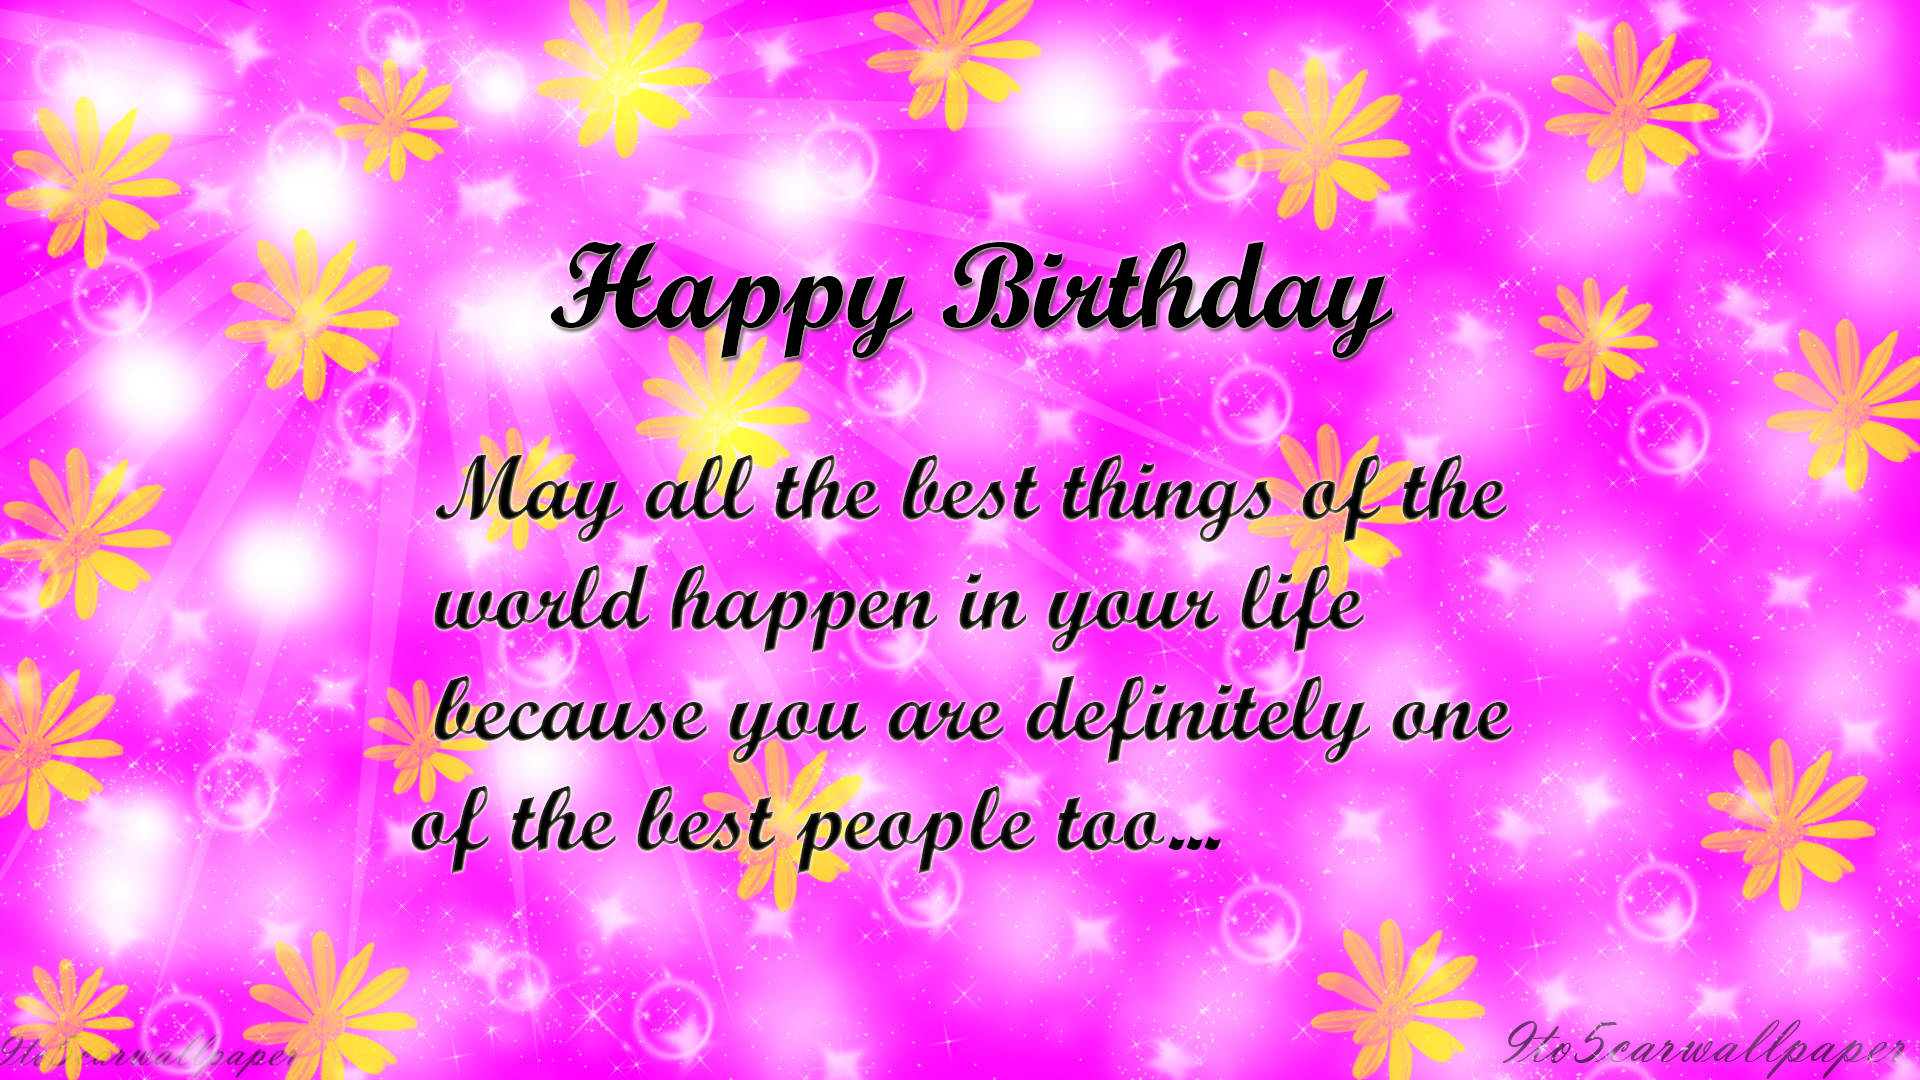 Best Birthday Quotes Images and Wallpapers - 9to5 Car Wallpapers